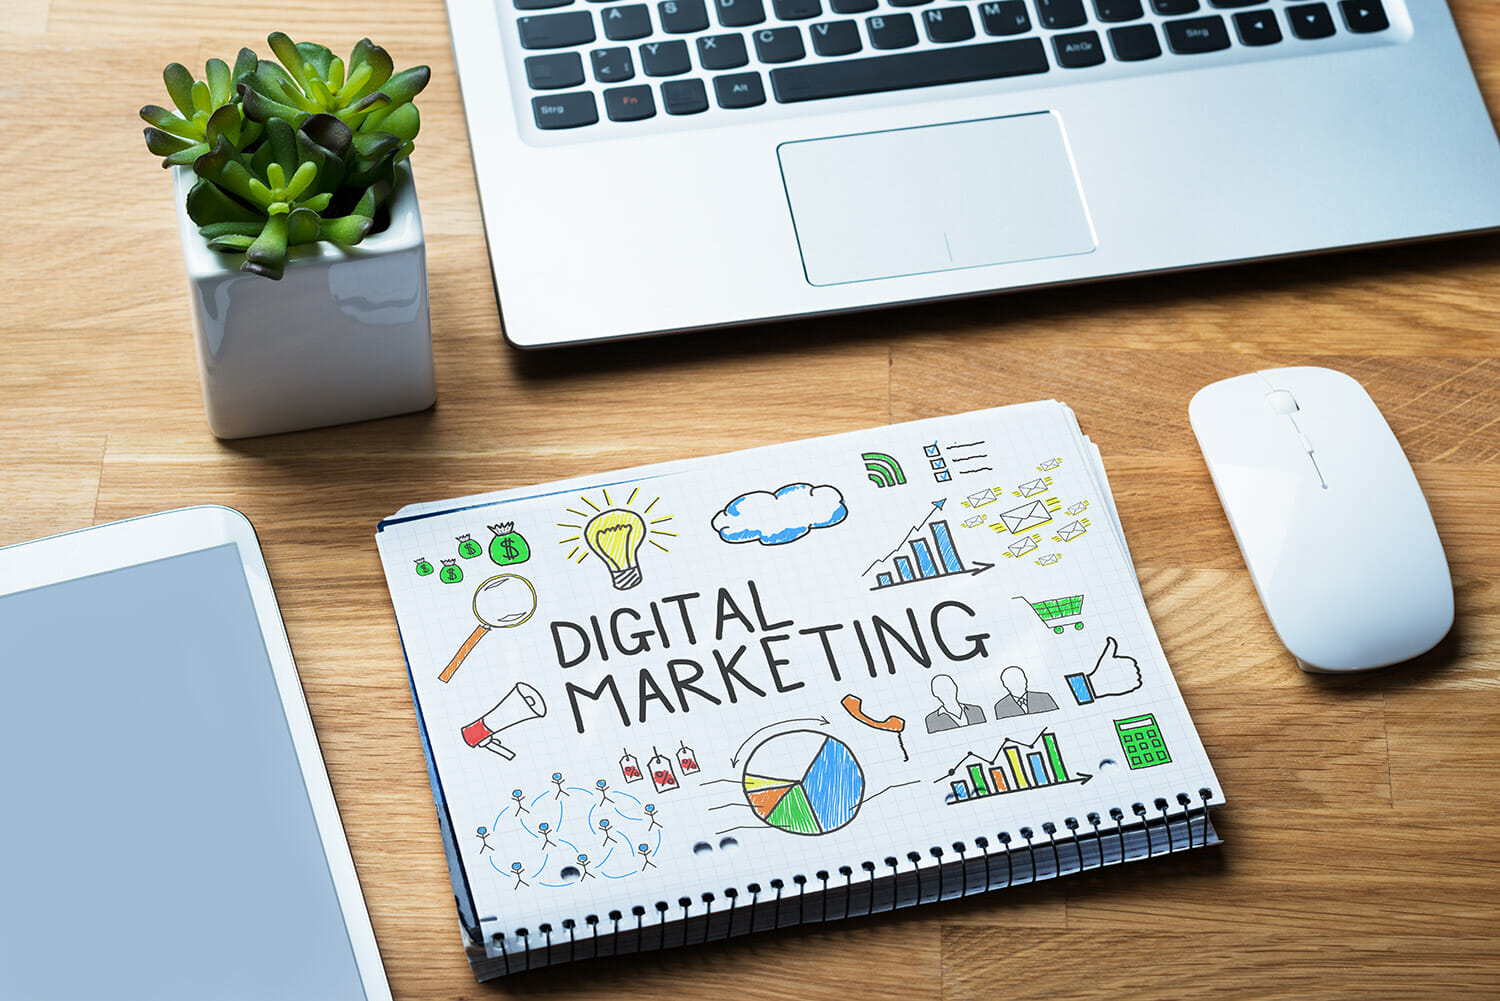 Are You New to Digital Marketing? Here Are the Terms You Need to Know.